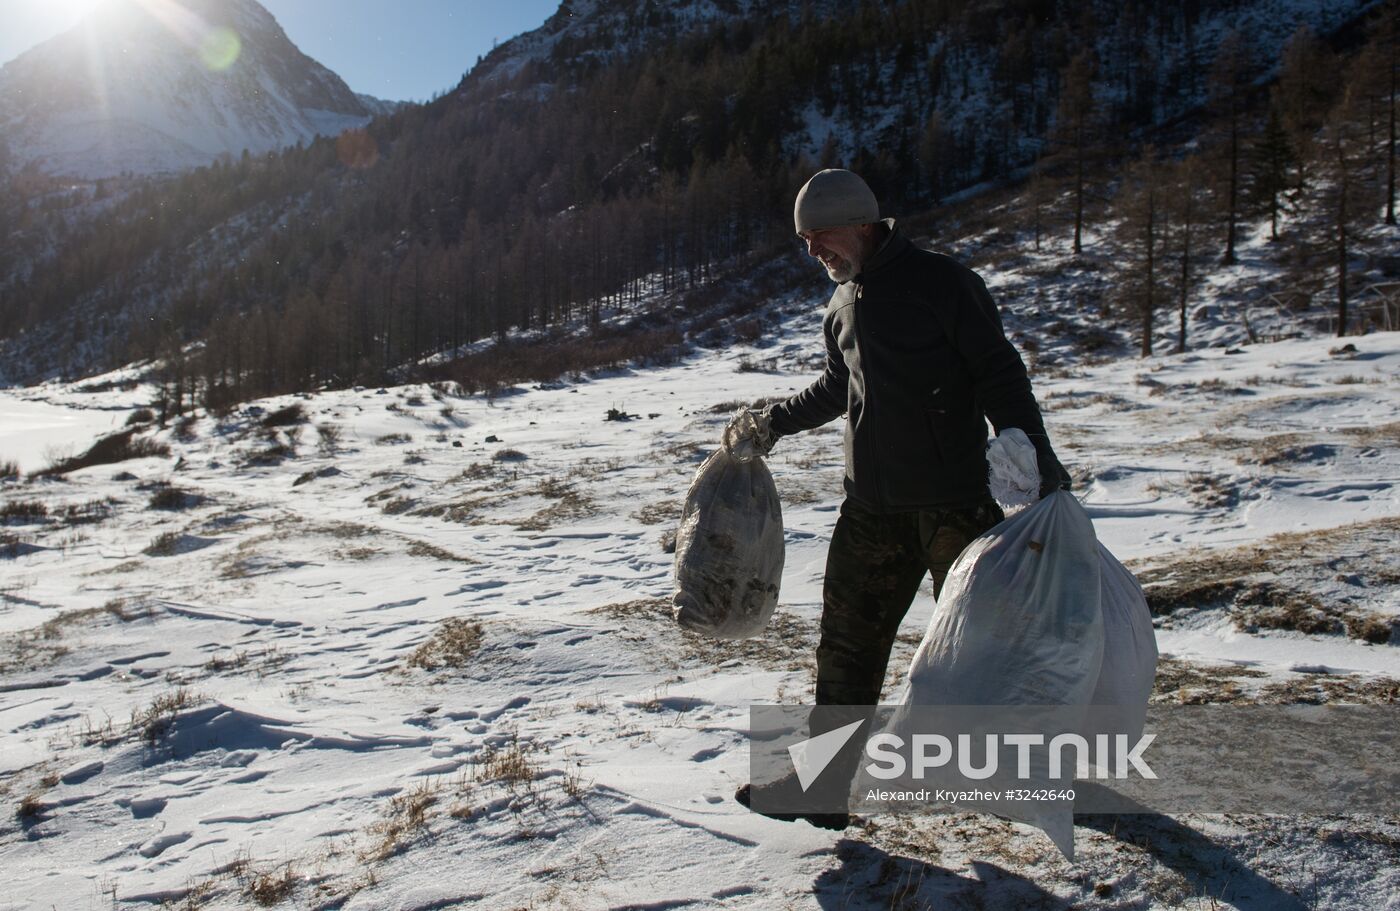 Campaign for cleaning up foot of Belukha Mountain